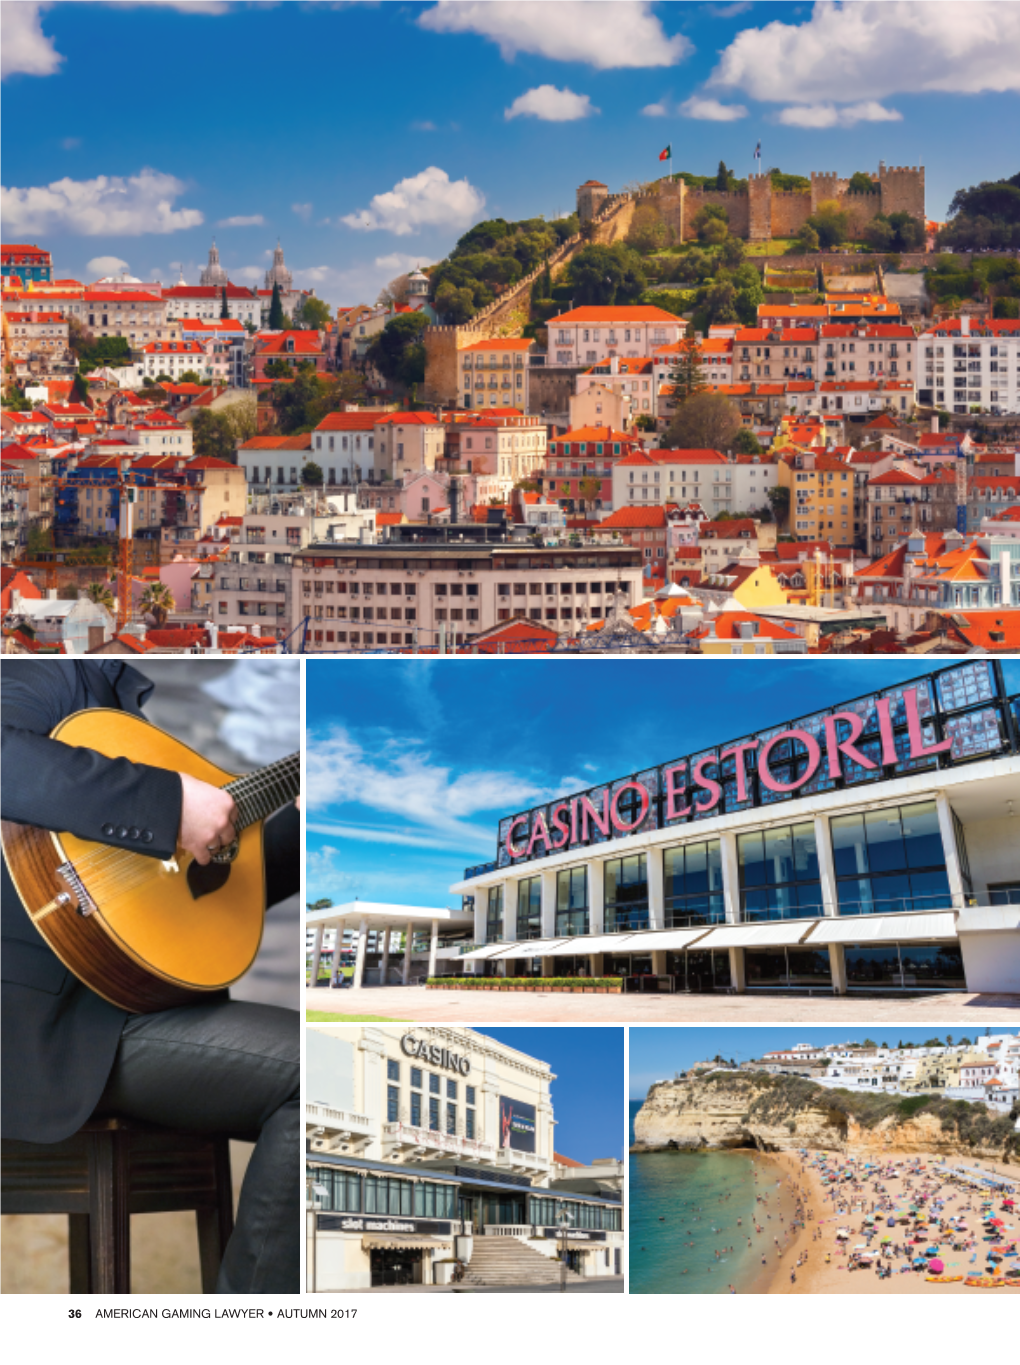 Cultural Artifacts in Portugal: Music and Casinos